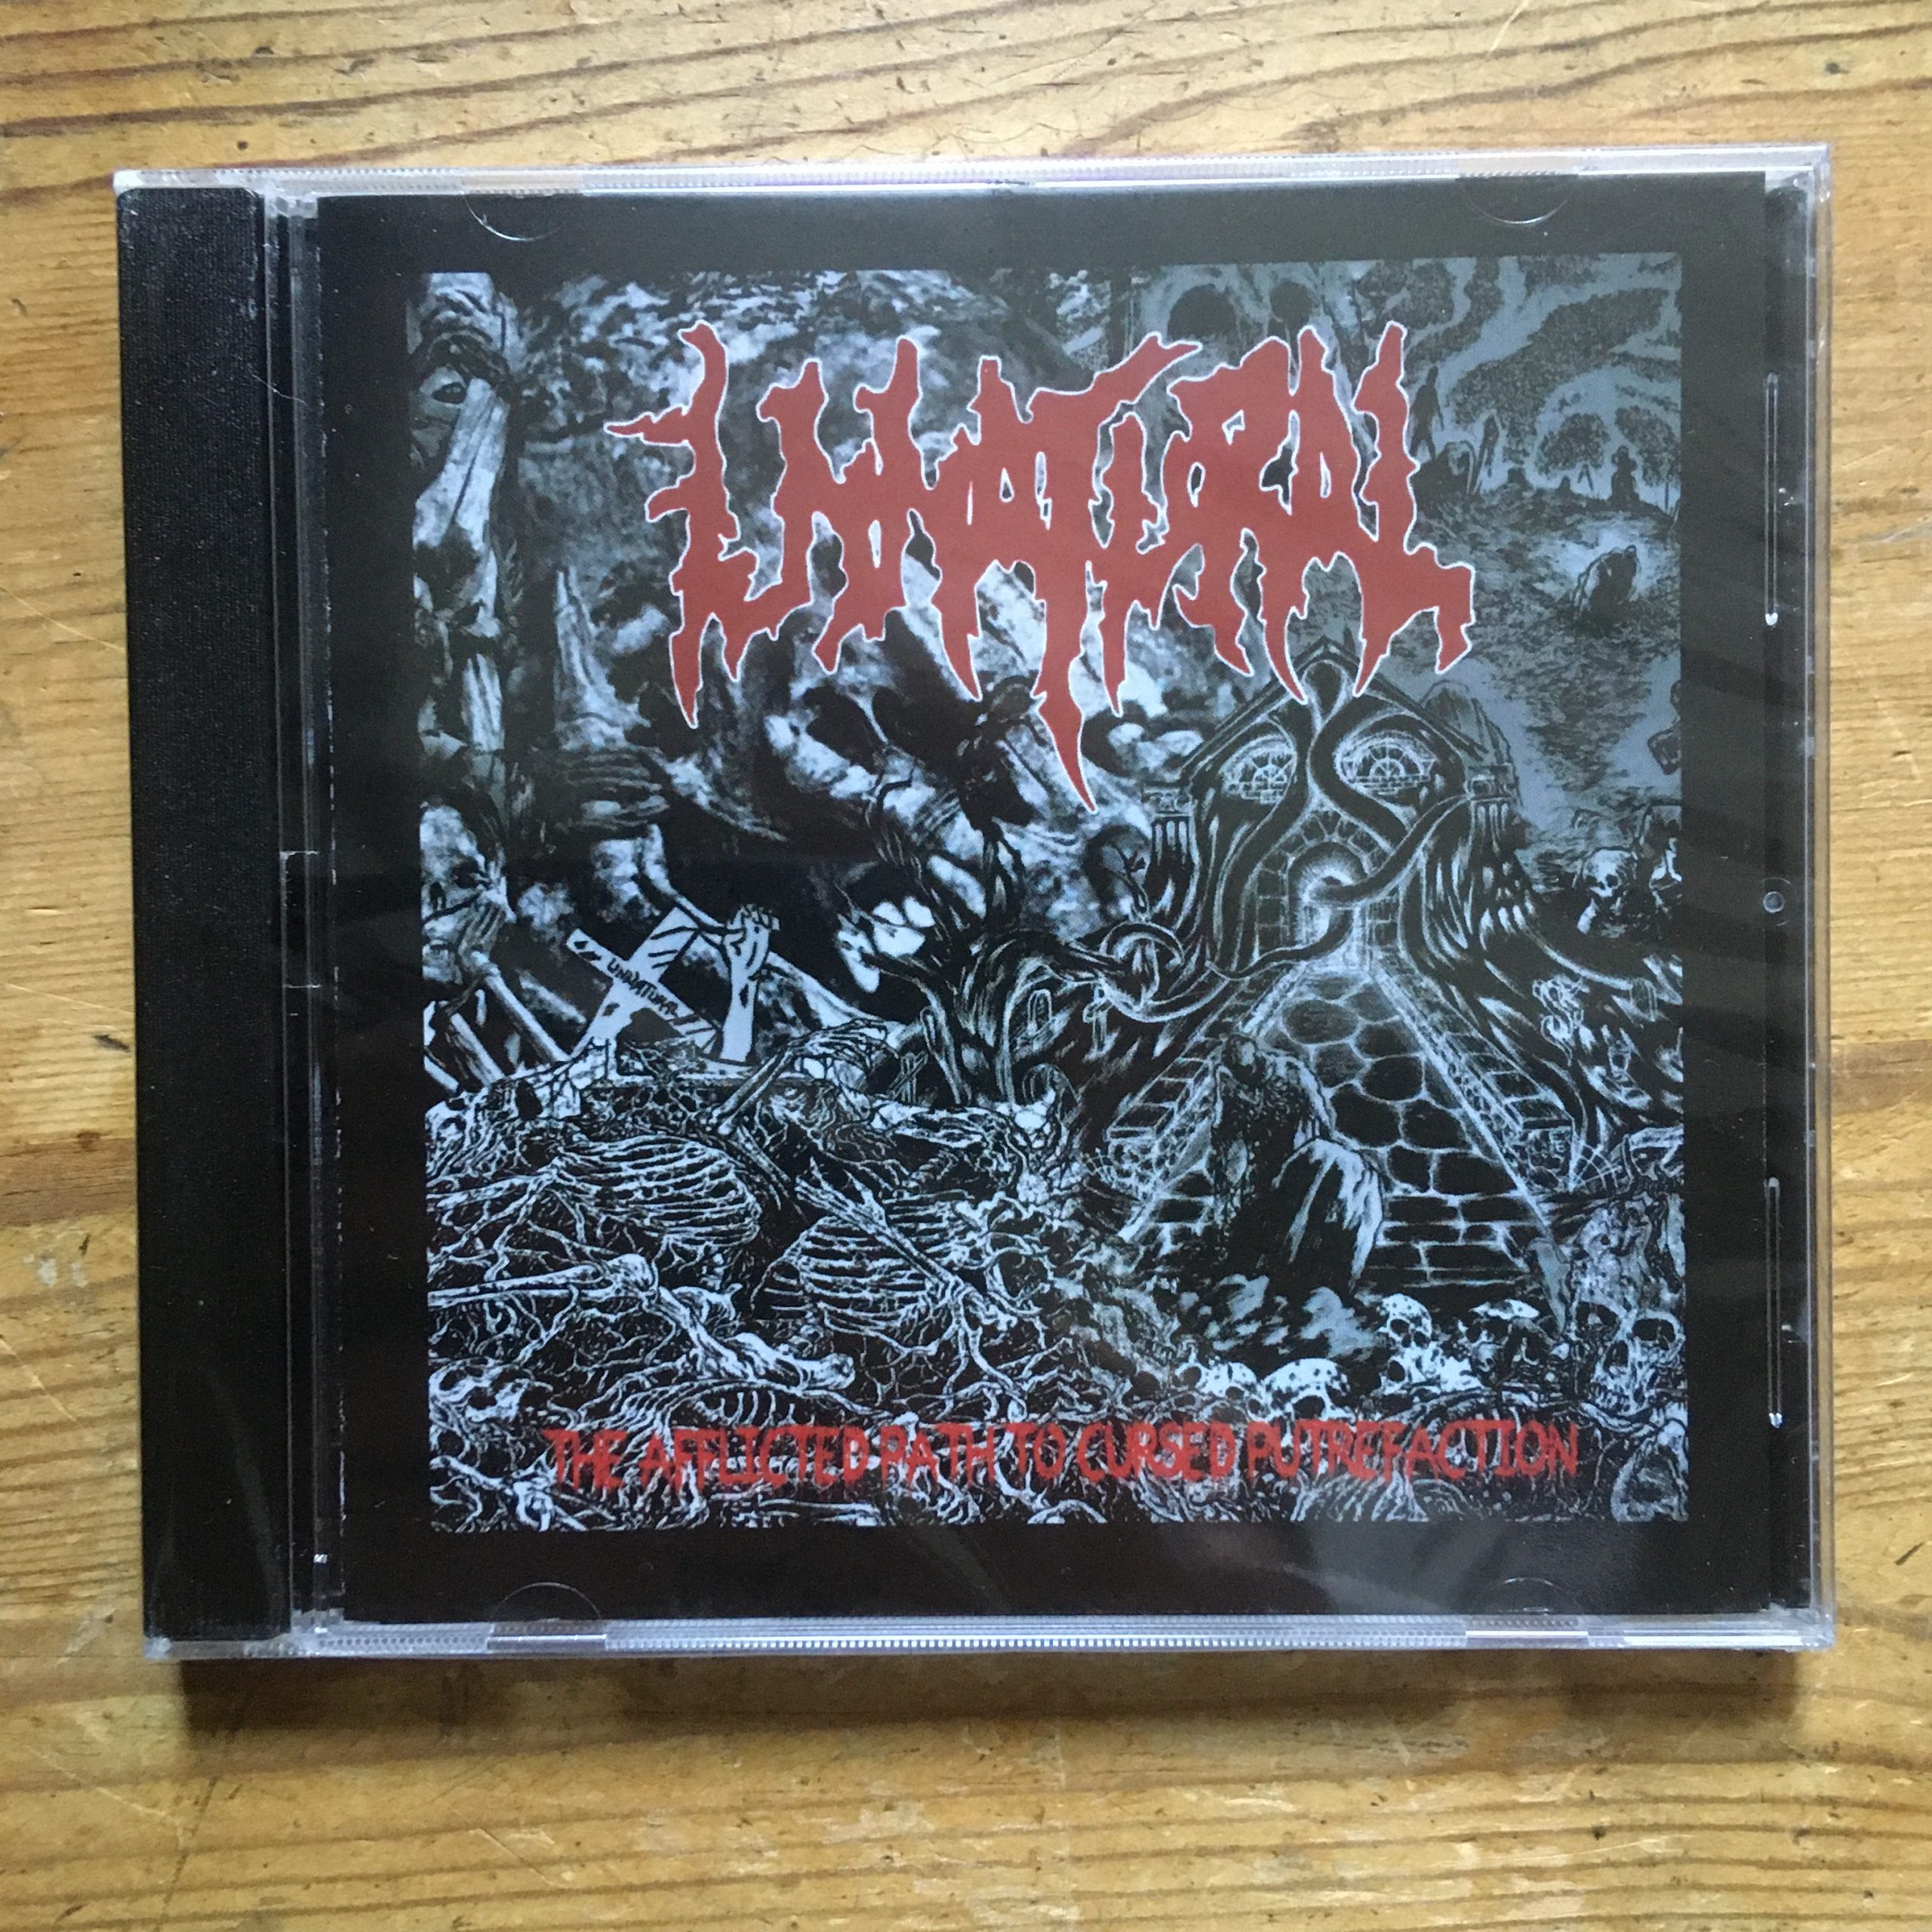 Photo of the Unnatural - "The Afflicted Path to Cursed Putrefaction Compilation" CD